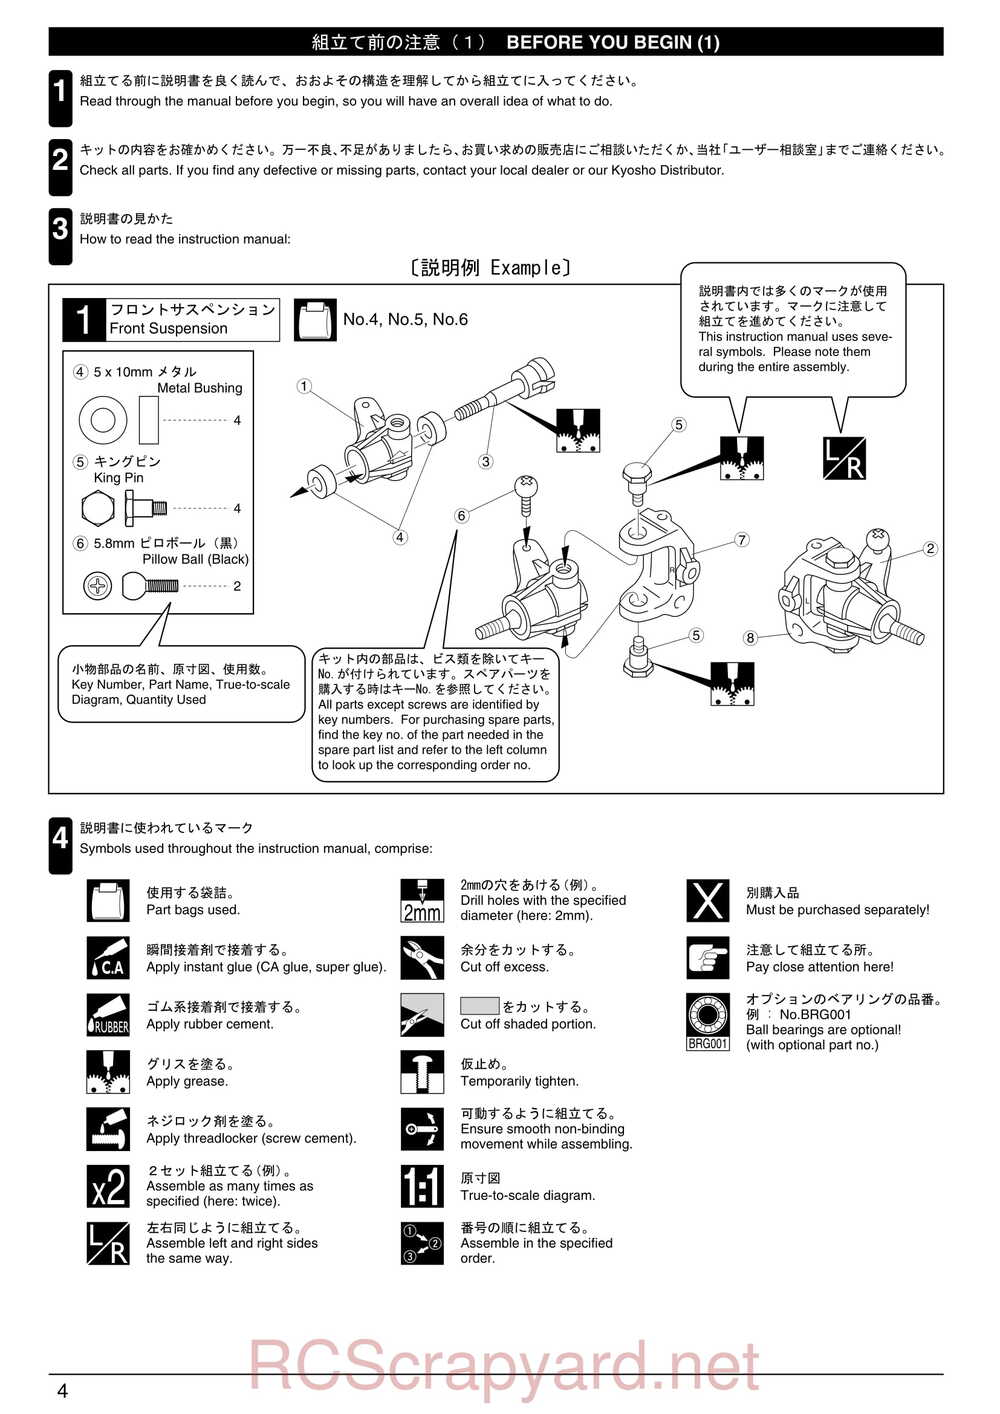 Kyosho - 31213 - TR-15 Monster-Touring - Manual - Page 04